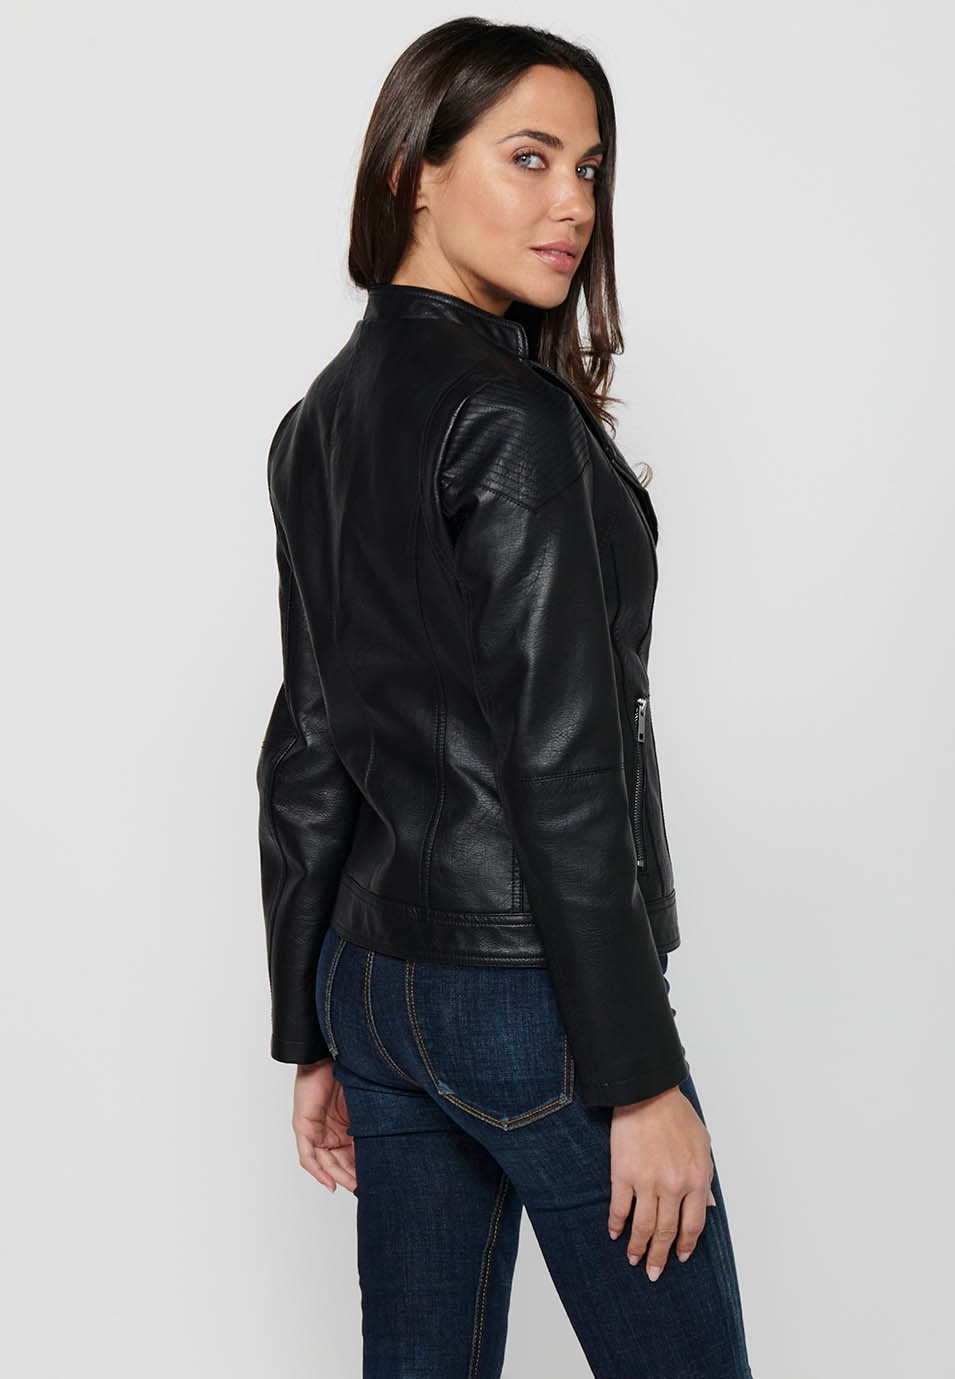 Long-sleeved high-neck jacket with front zipper closure and details on the shoulders with front pockets in Black for Women 2